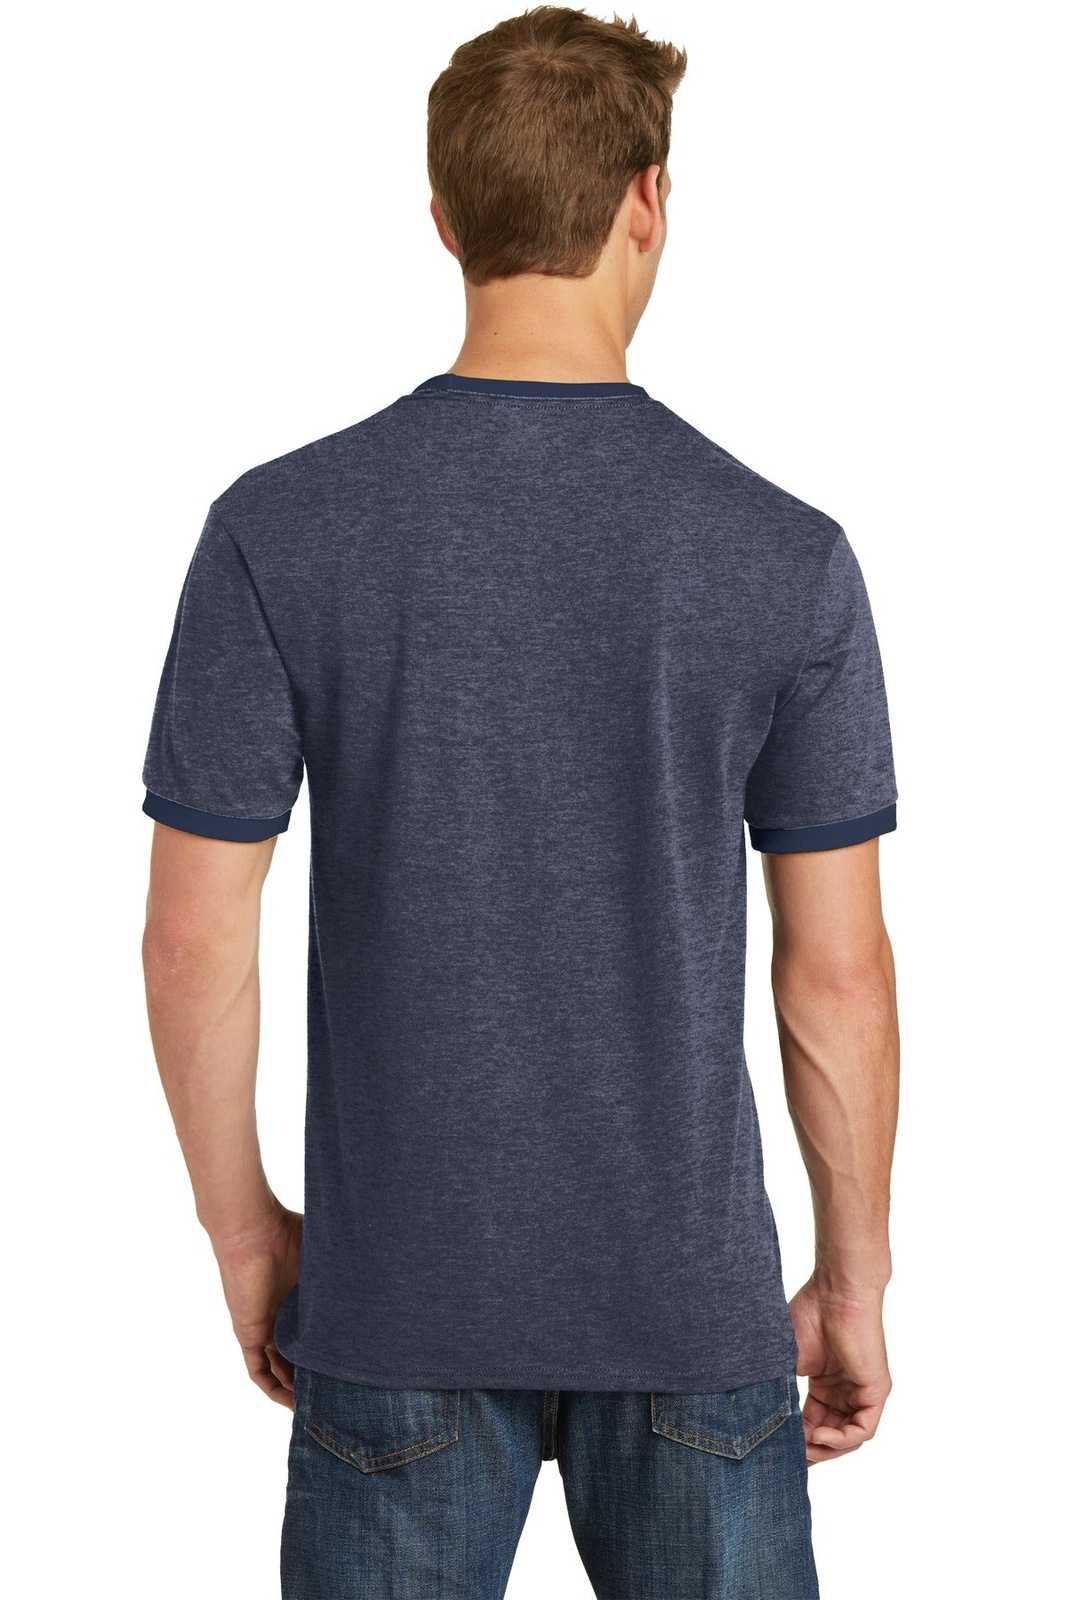 Port &amp; Company PC54R Core Cotton Ringer Tee - Heather Navy Navy - HIT a Double - 2